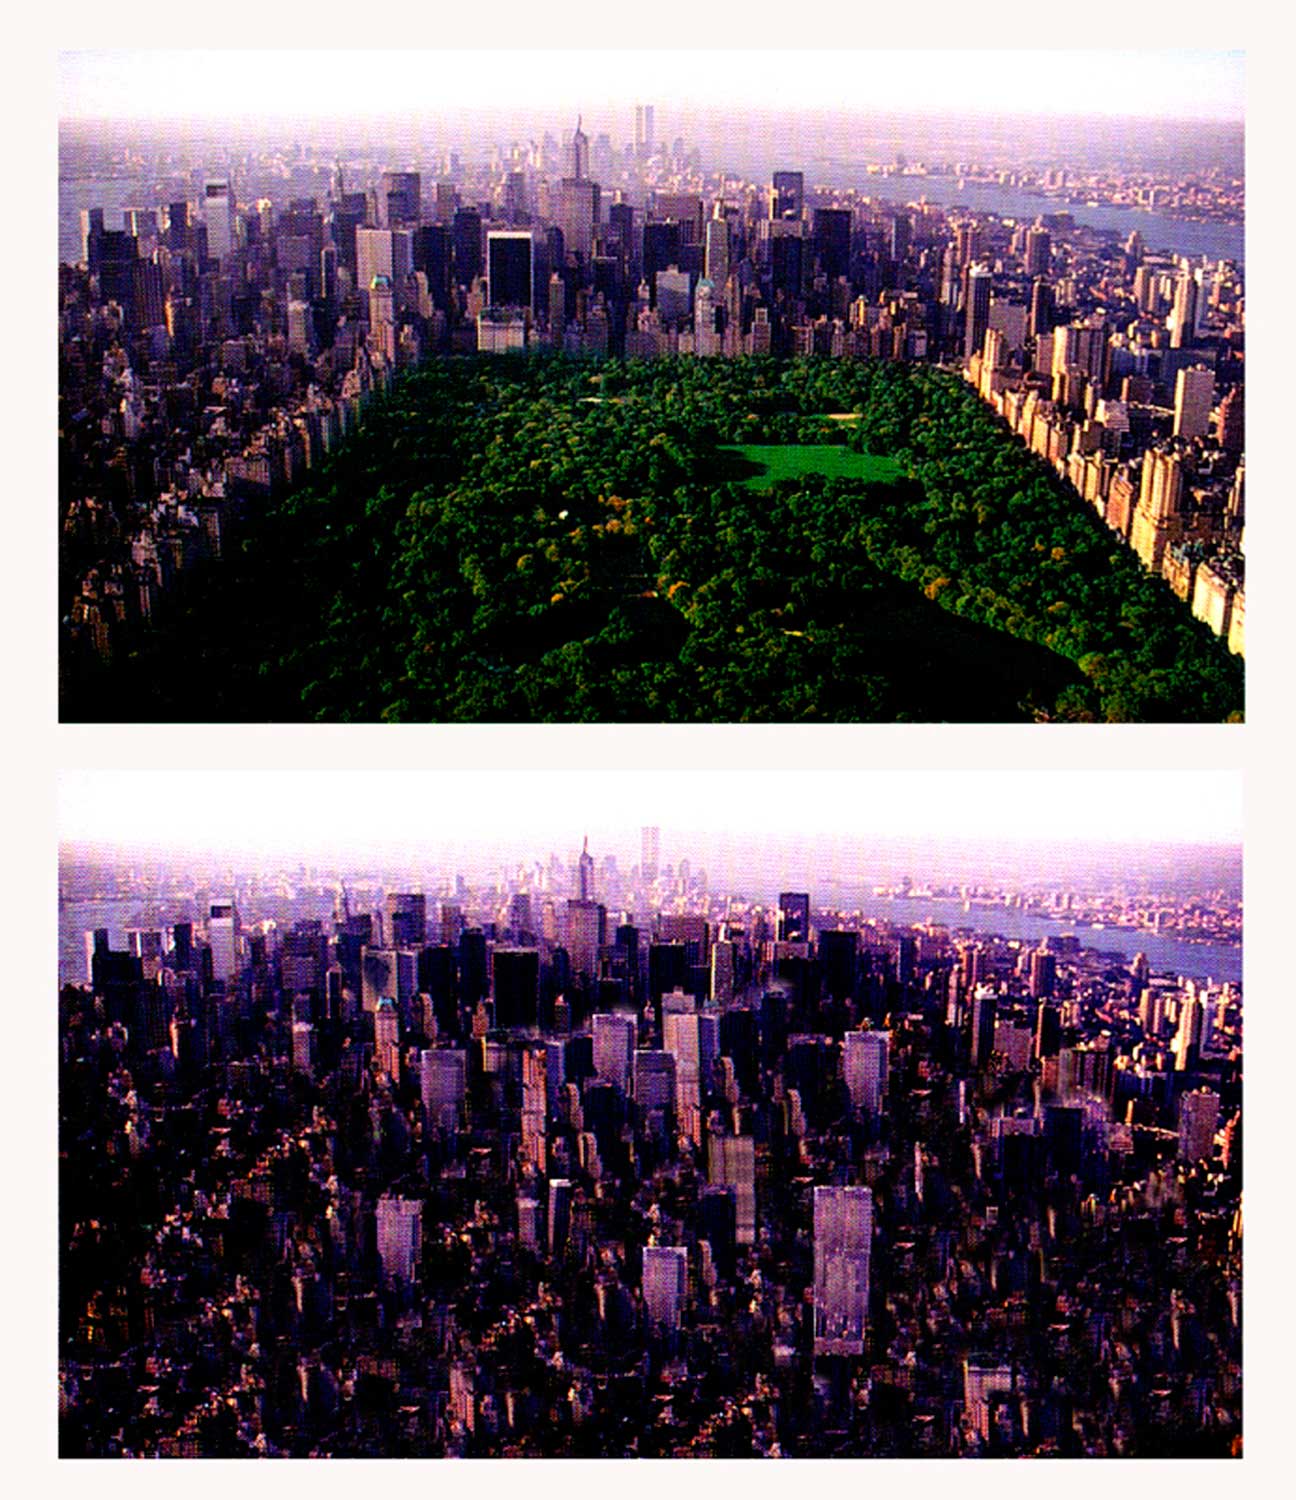 Two photographs, the top one showing Manhattan with Central Park in its actual location and the bottom one altered to remove the park.